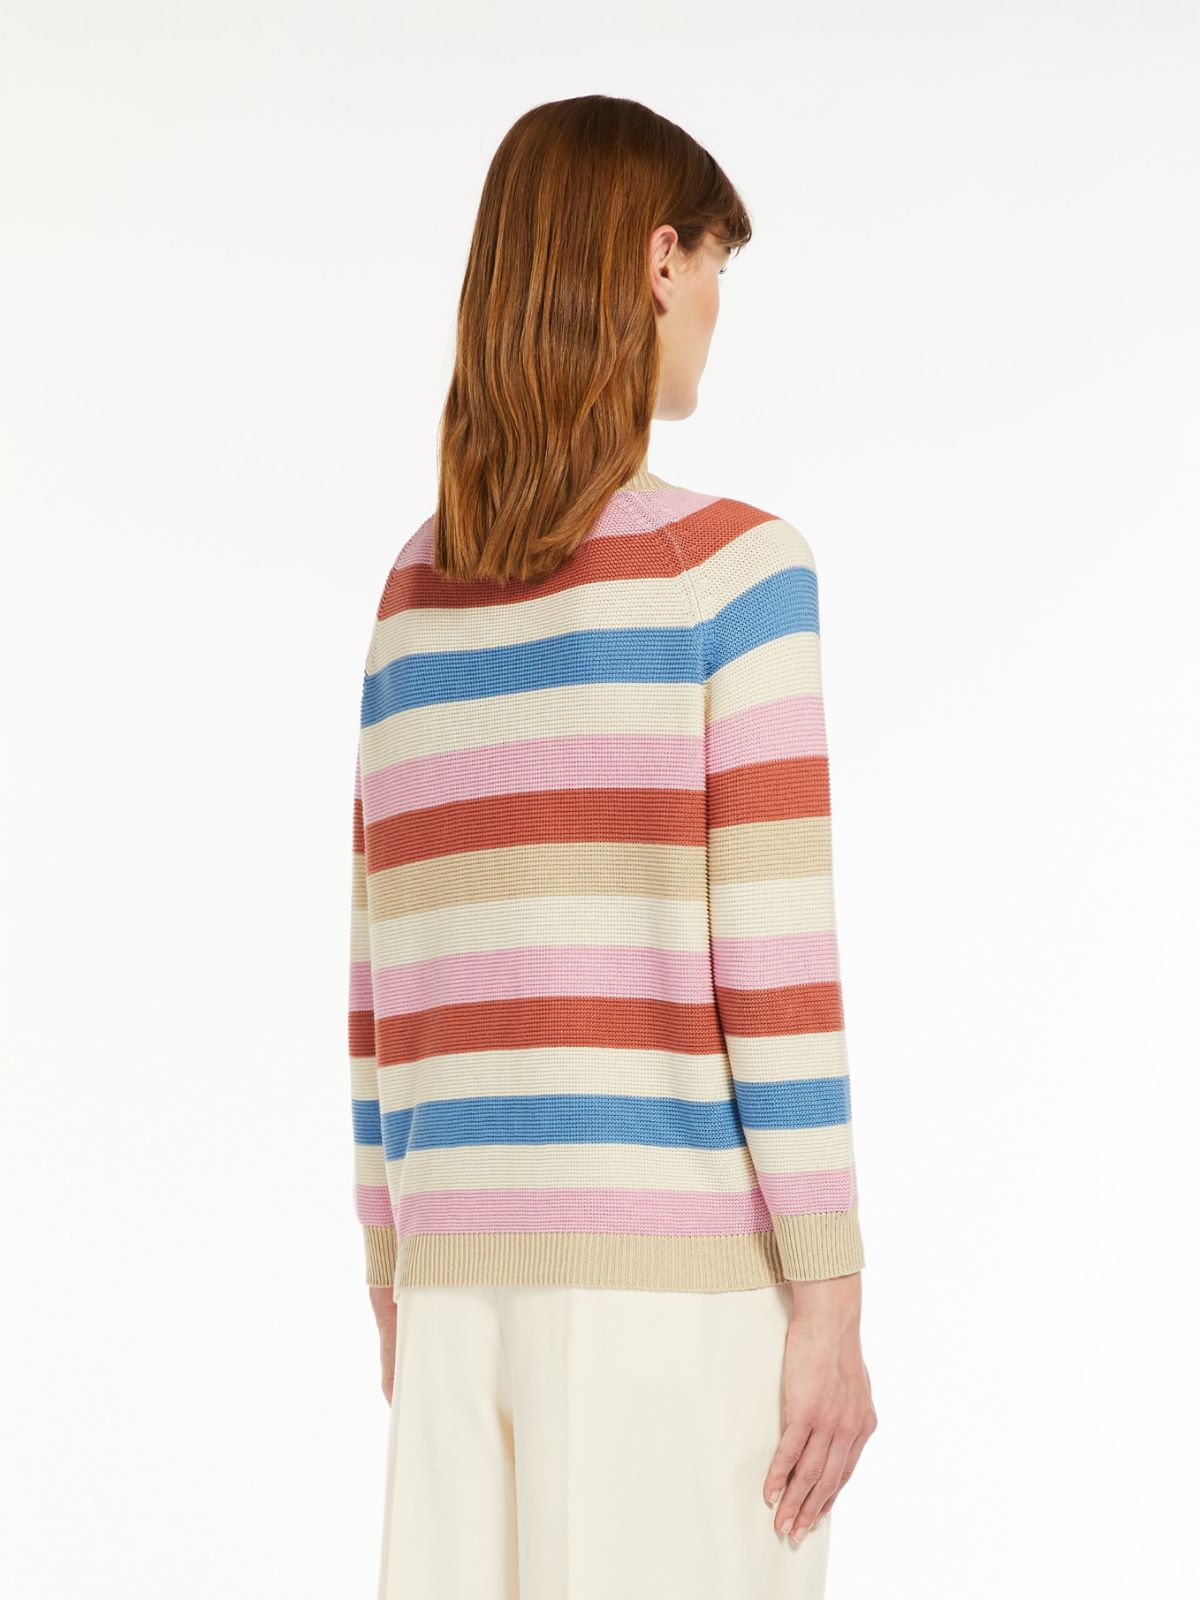 Relaxed-fit cotton sweater - MULTICOLOUR - Weekend Max Mara - 3